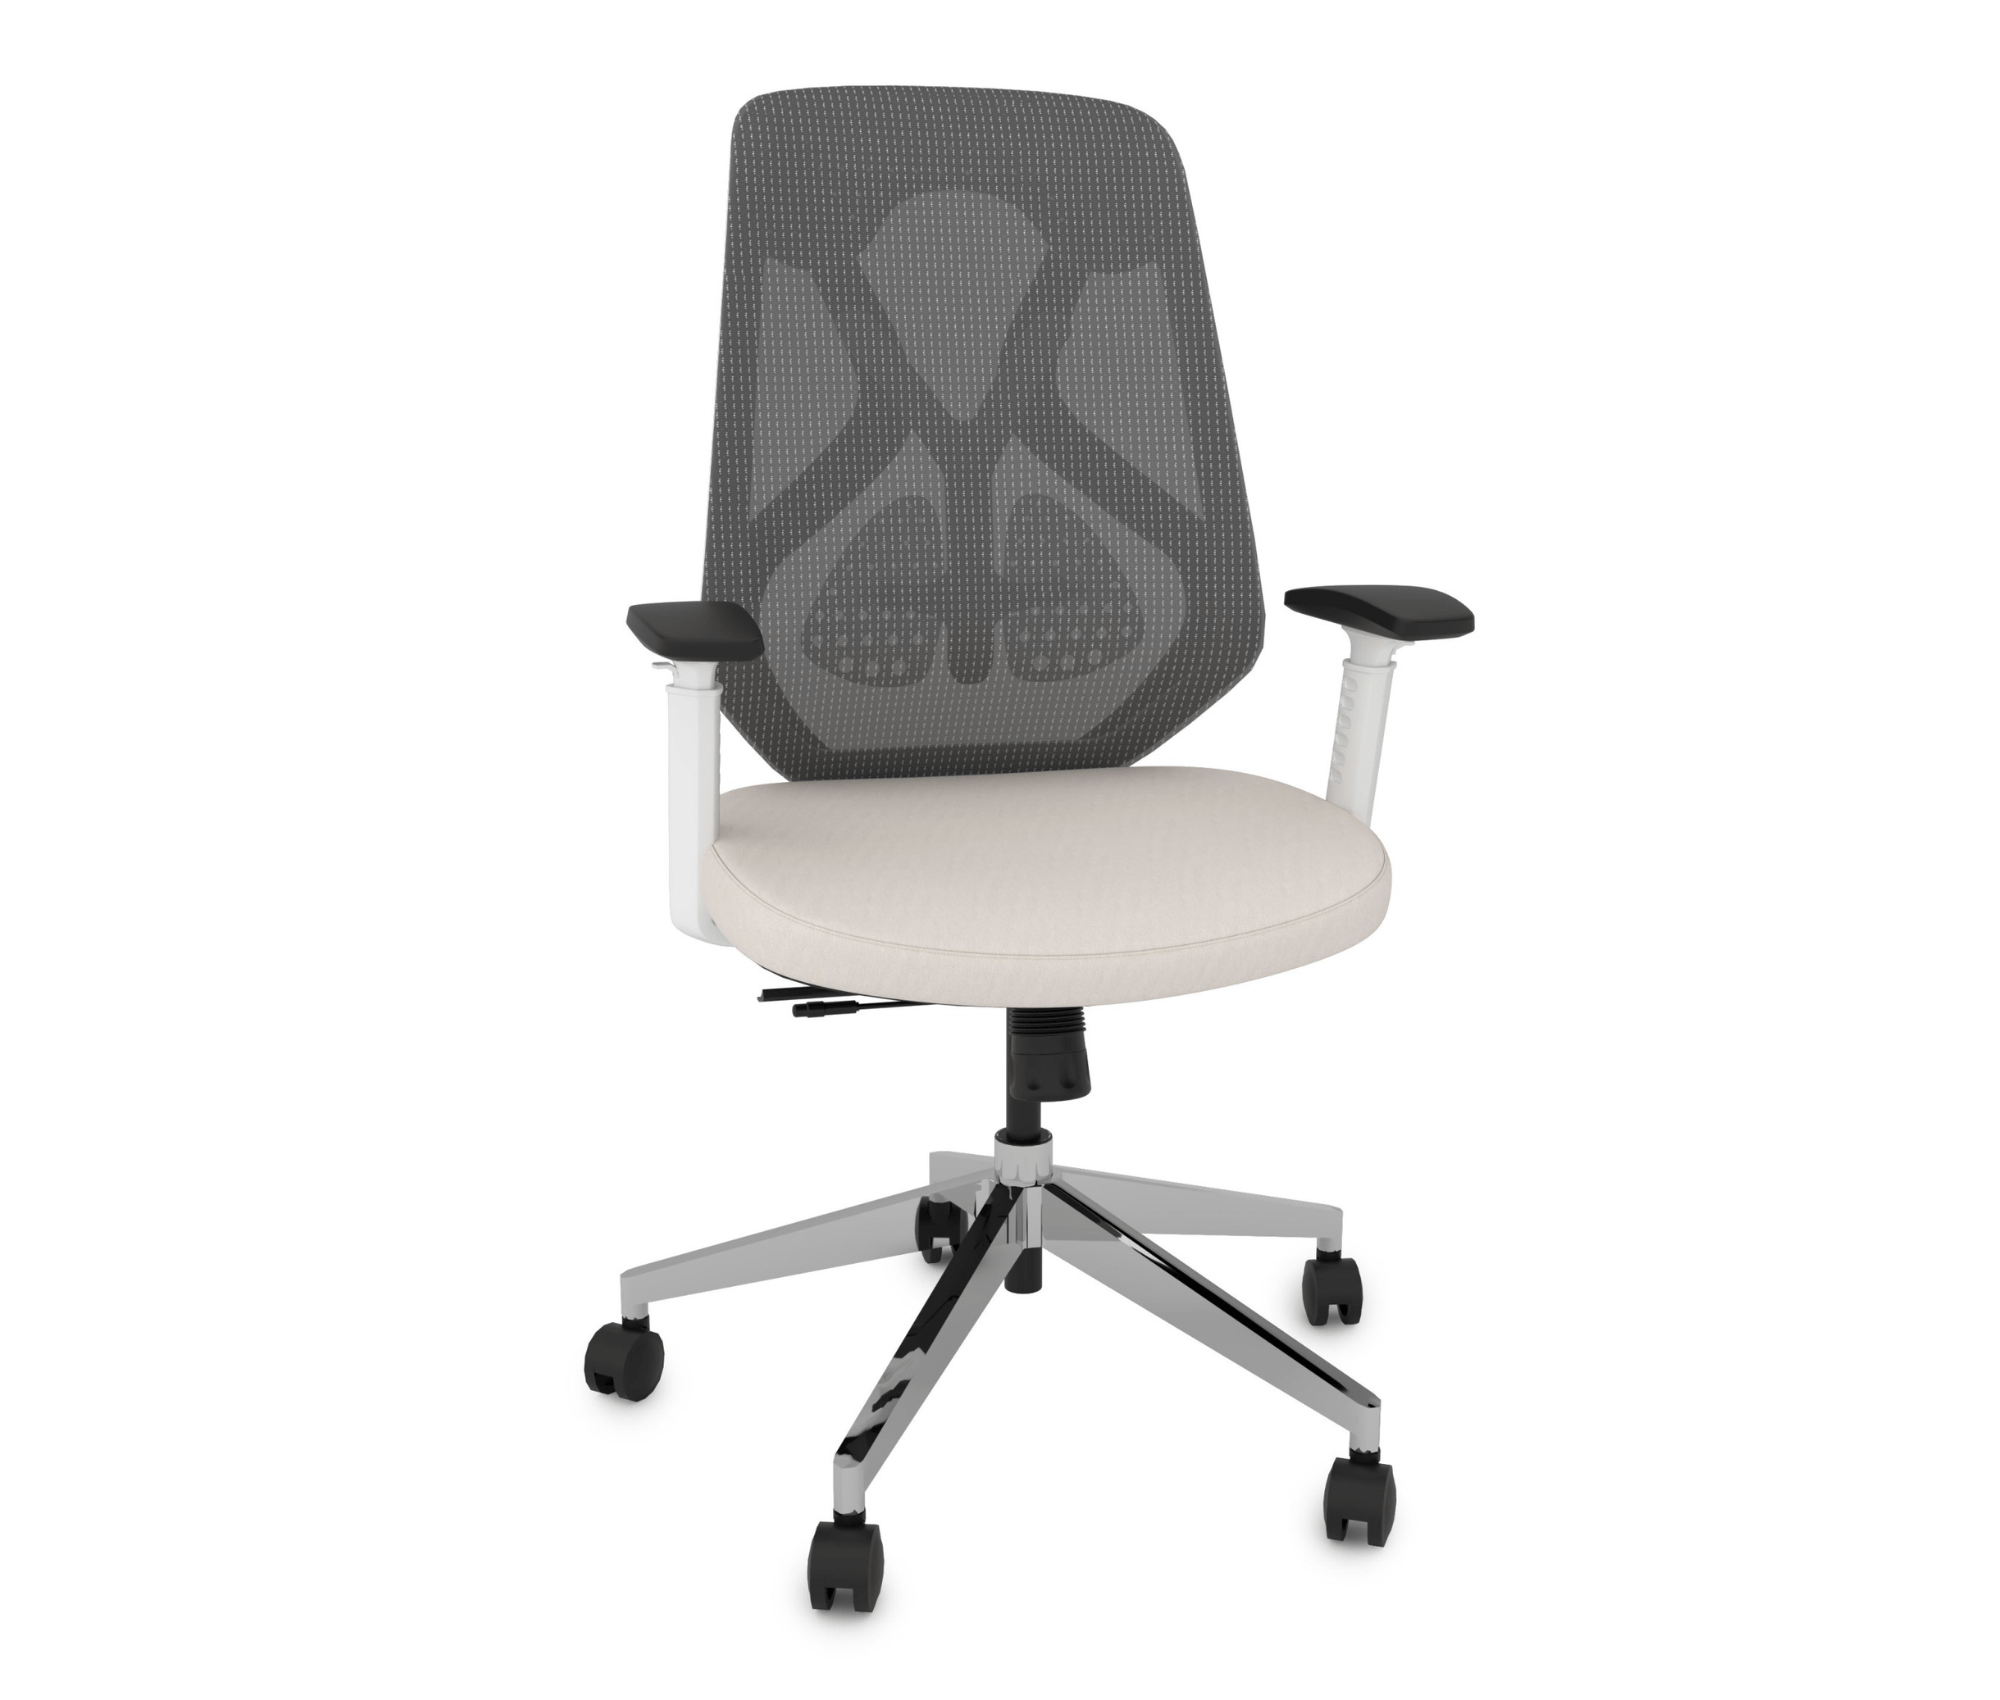 Ergonomic Plus Chair | Posture-Correcting Office Chair Porvata Office Chairs Linen